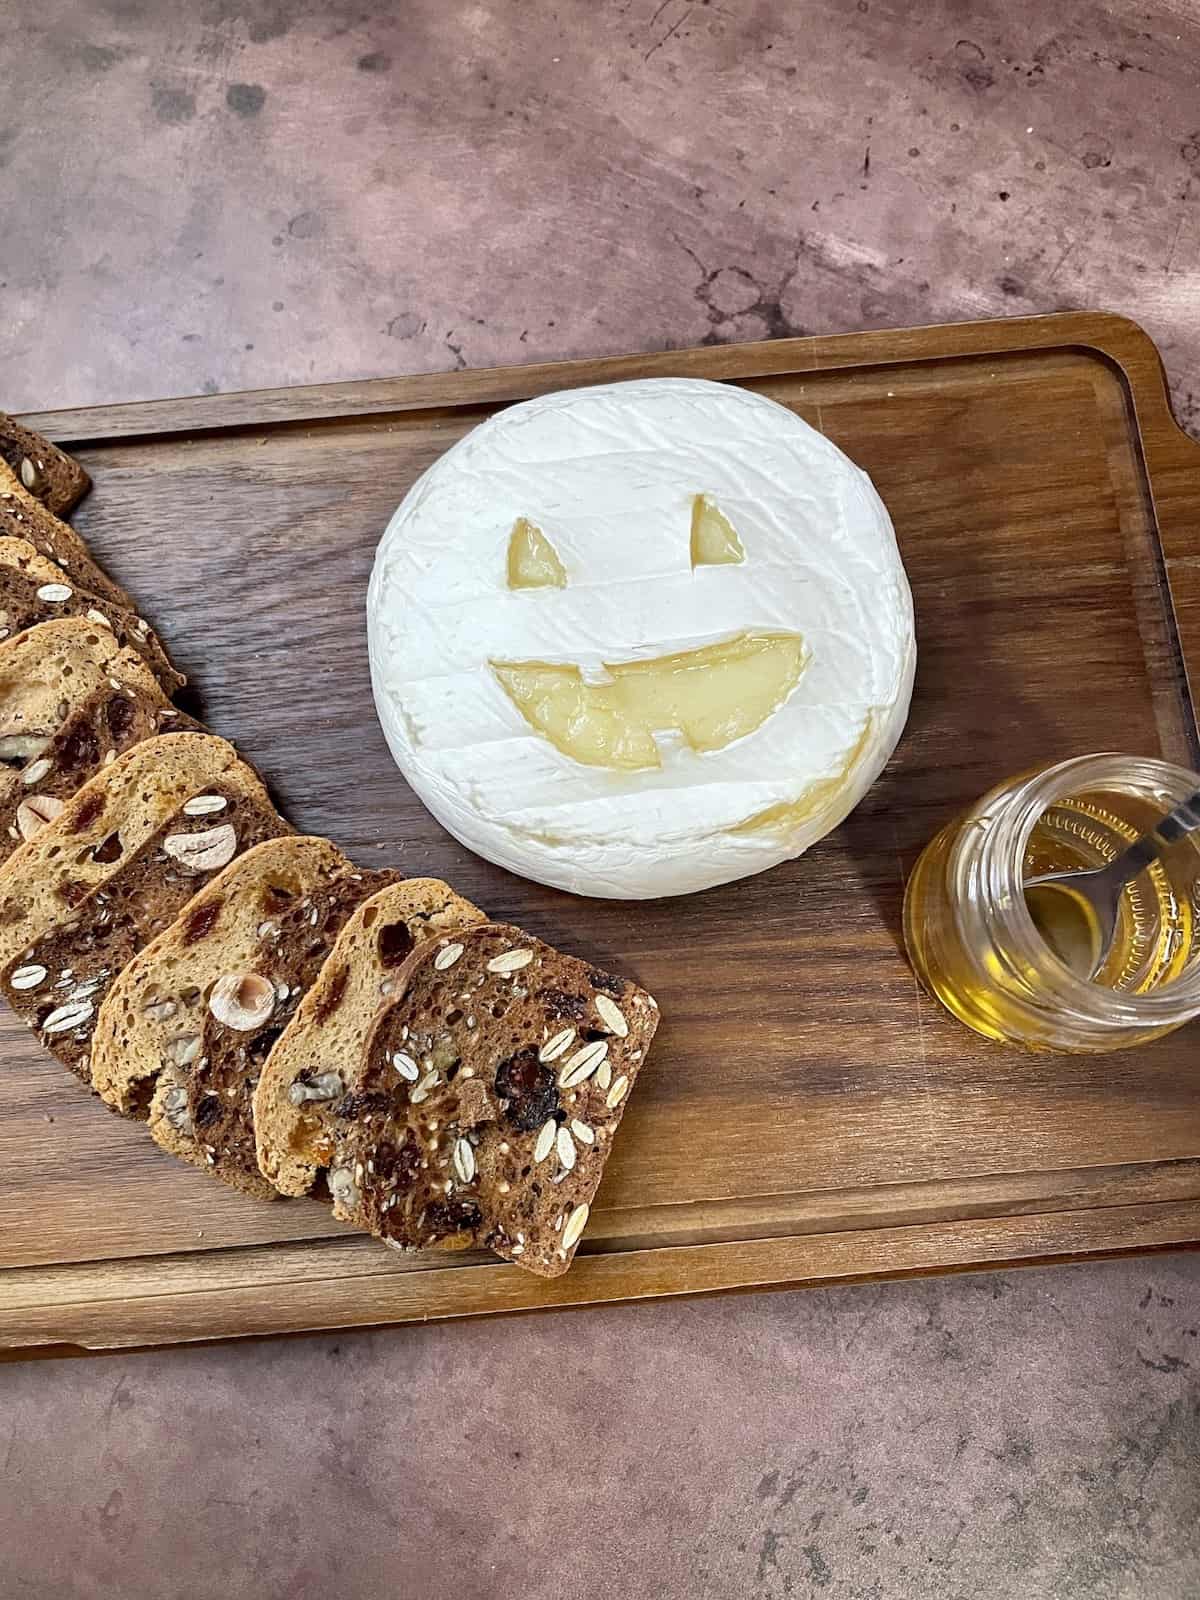 Brie cheese carved like a Jack O'Lantern on a wood board with crackers and honey.